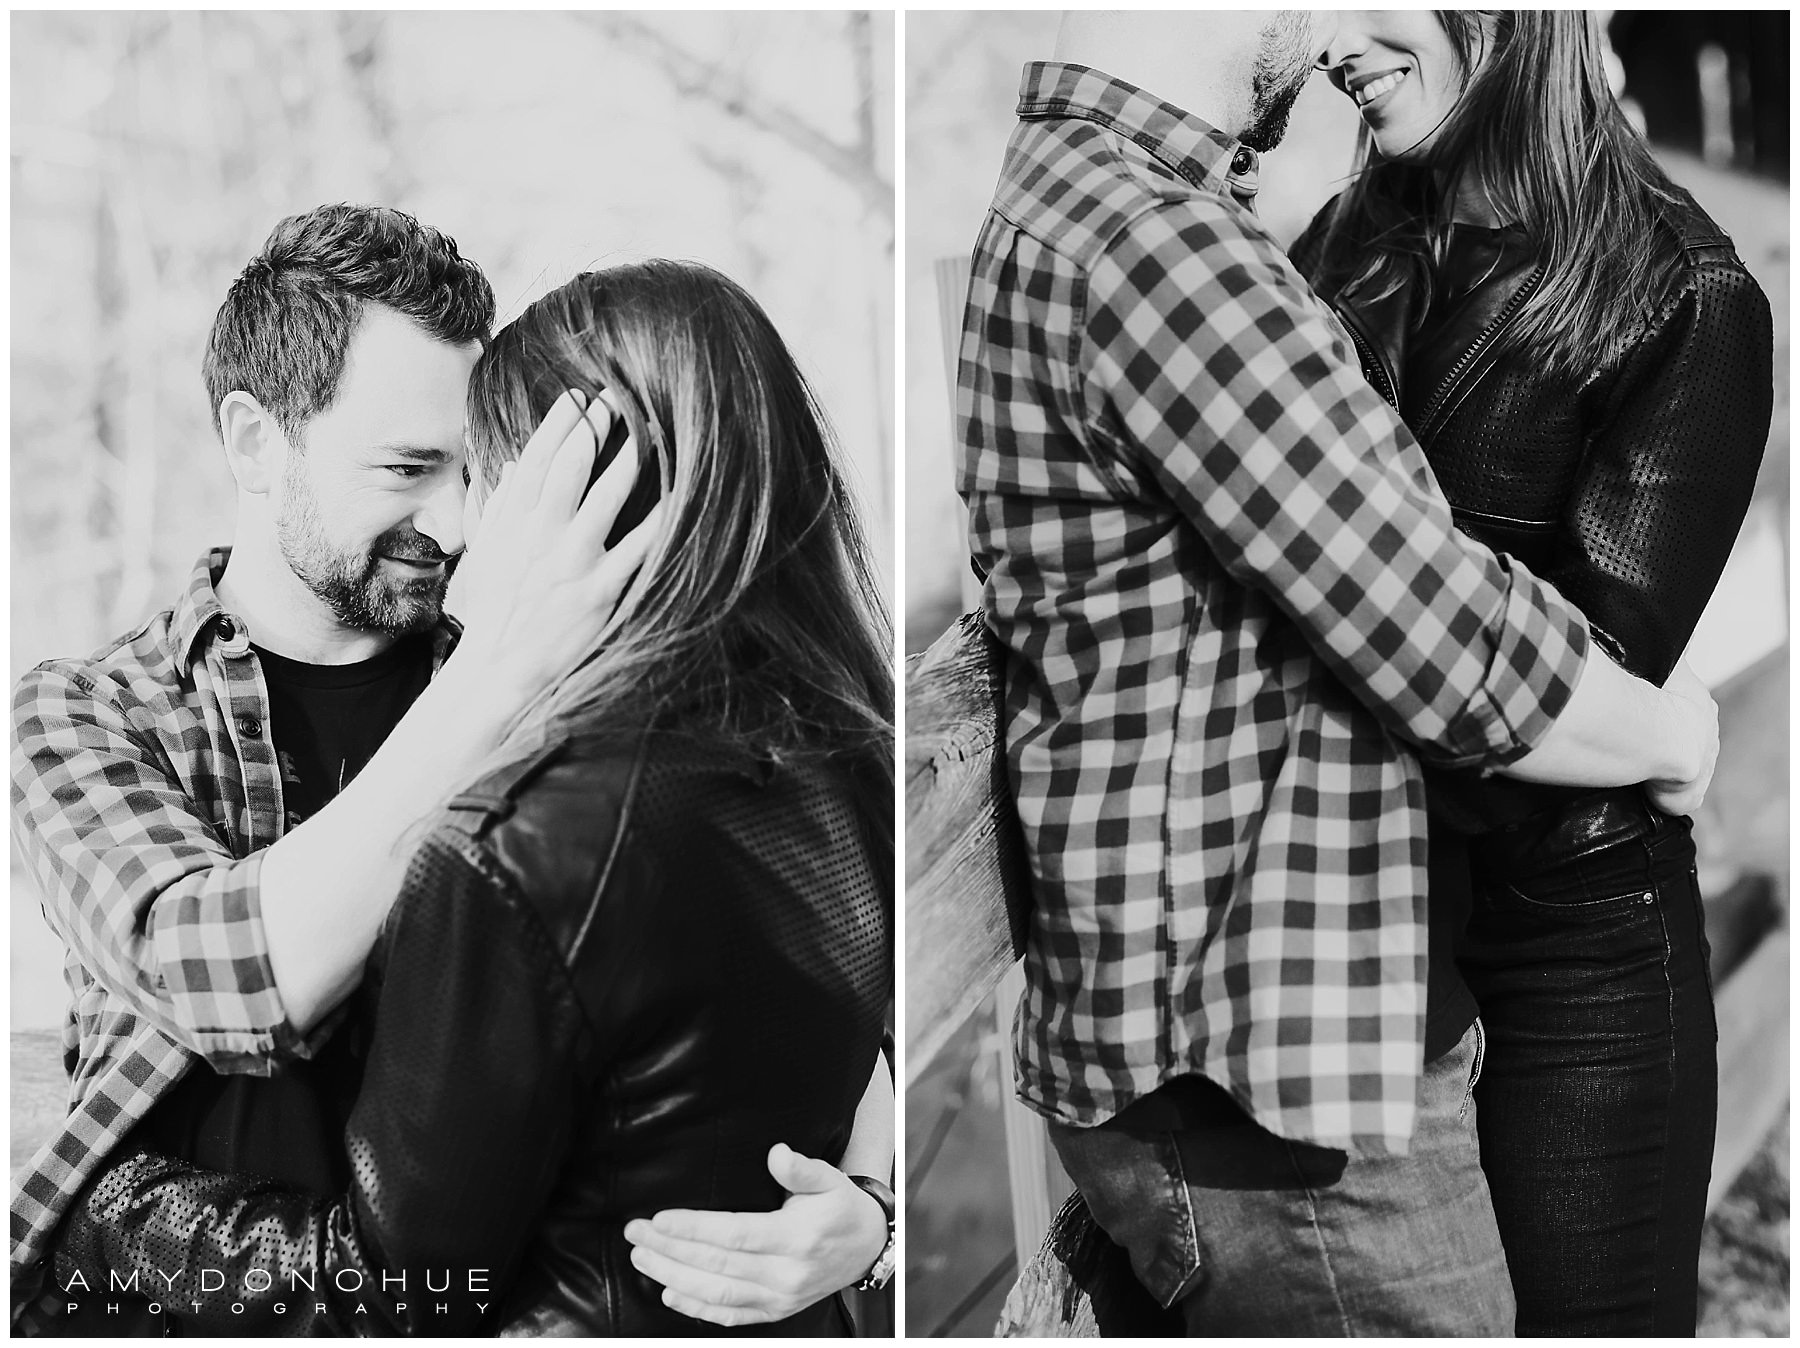 Intimate Engagement Photos Black and White Woodstock, Vermont | © Amy Donohue Photography